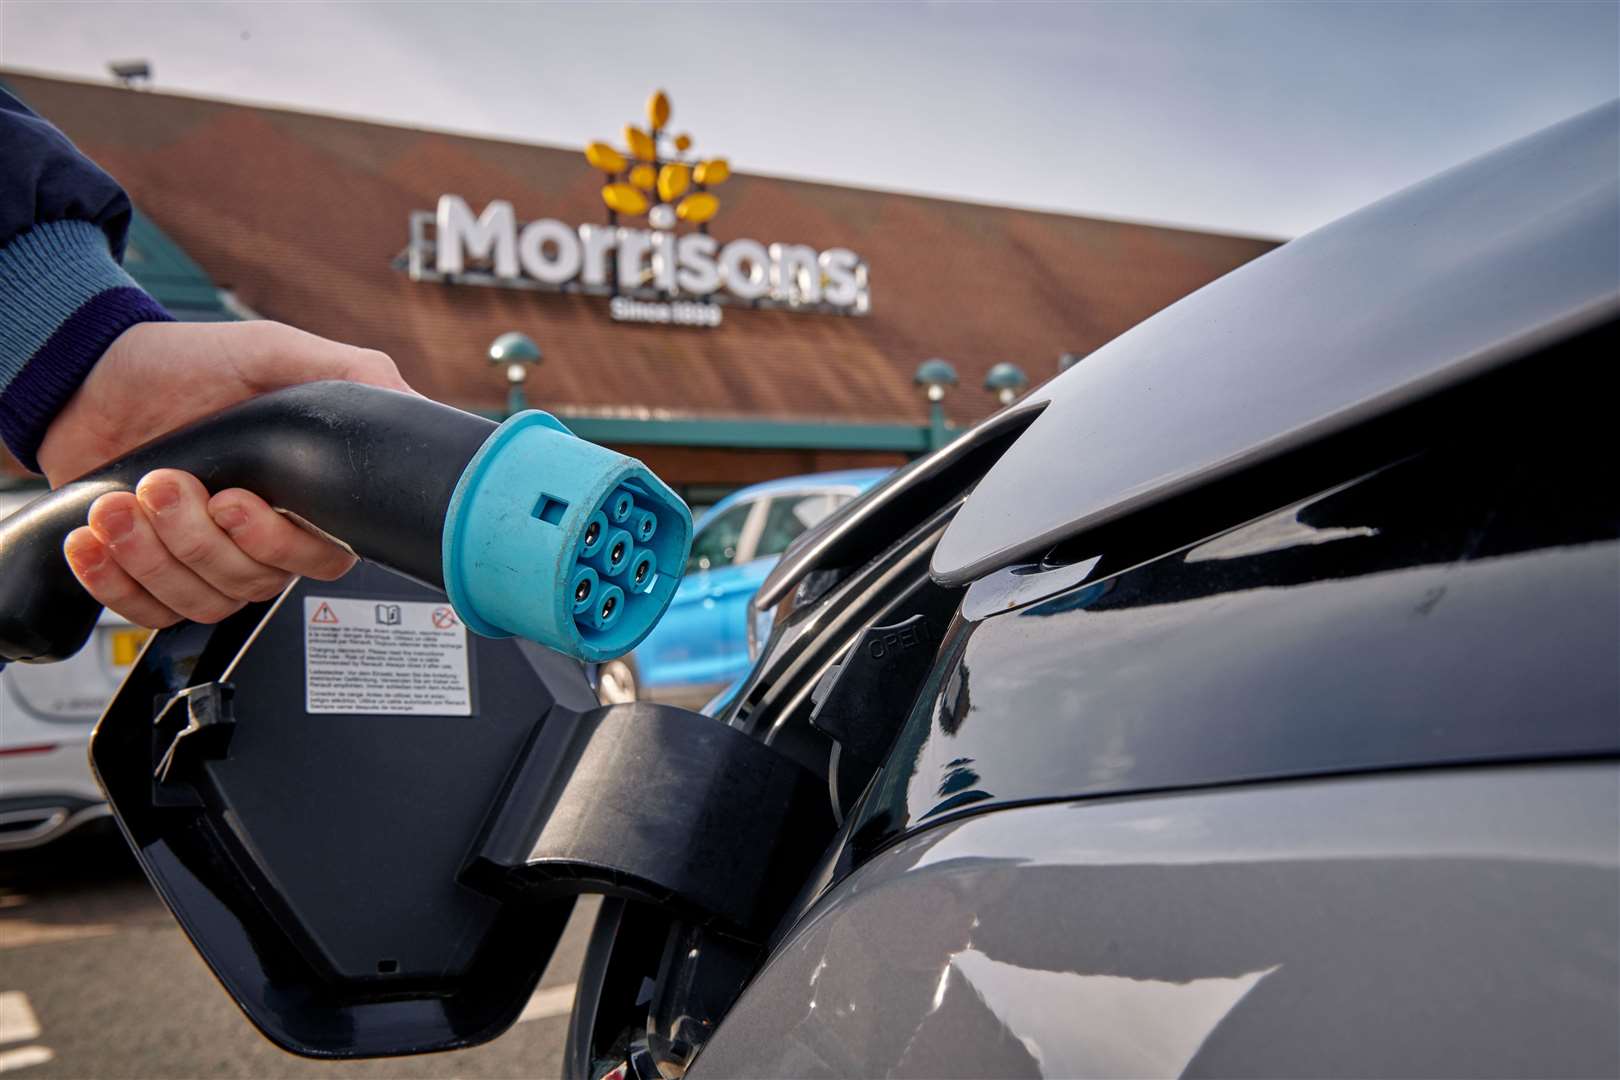 Morrisons has rolled out rapid charge points at many of its supermarket